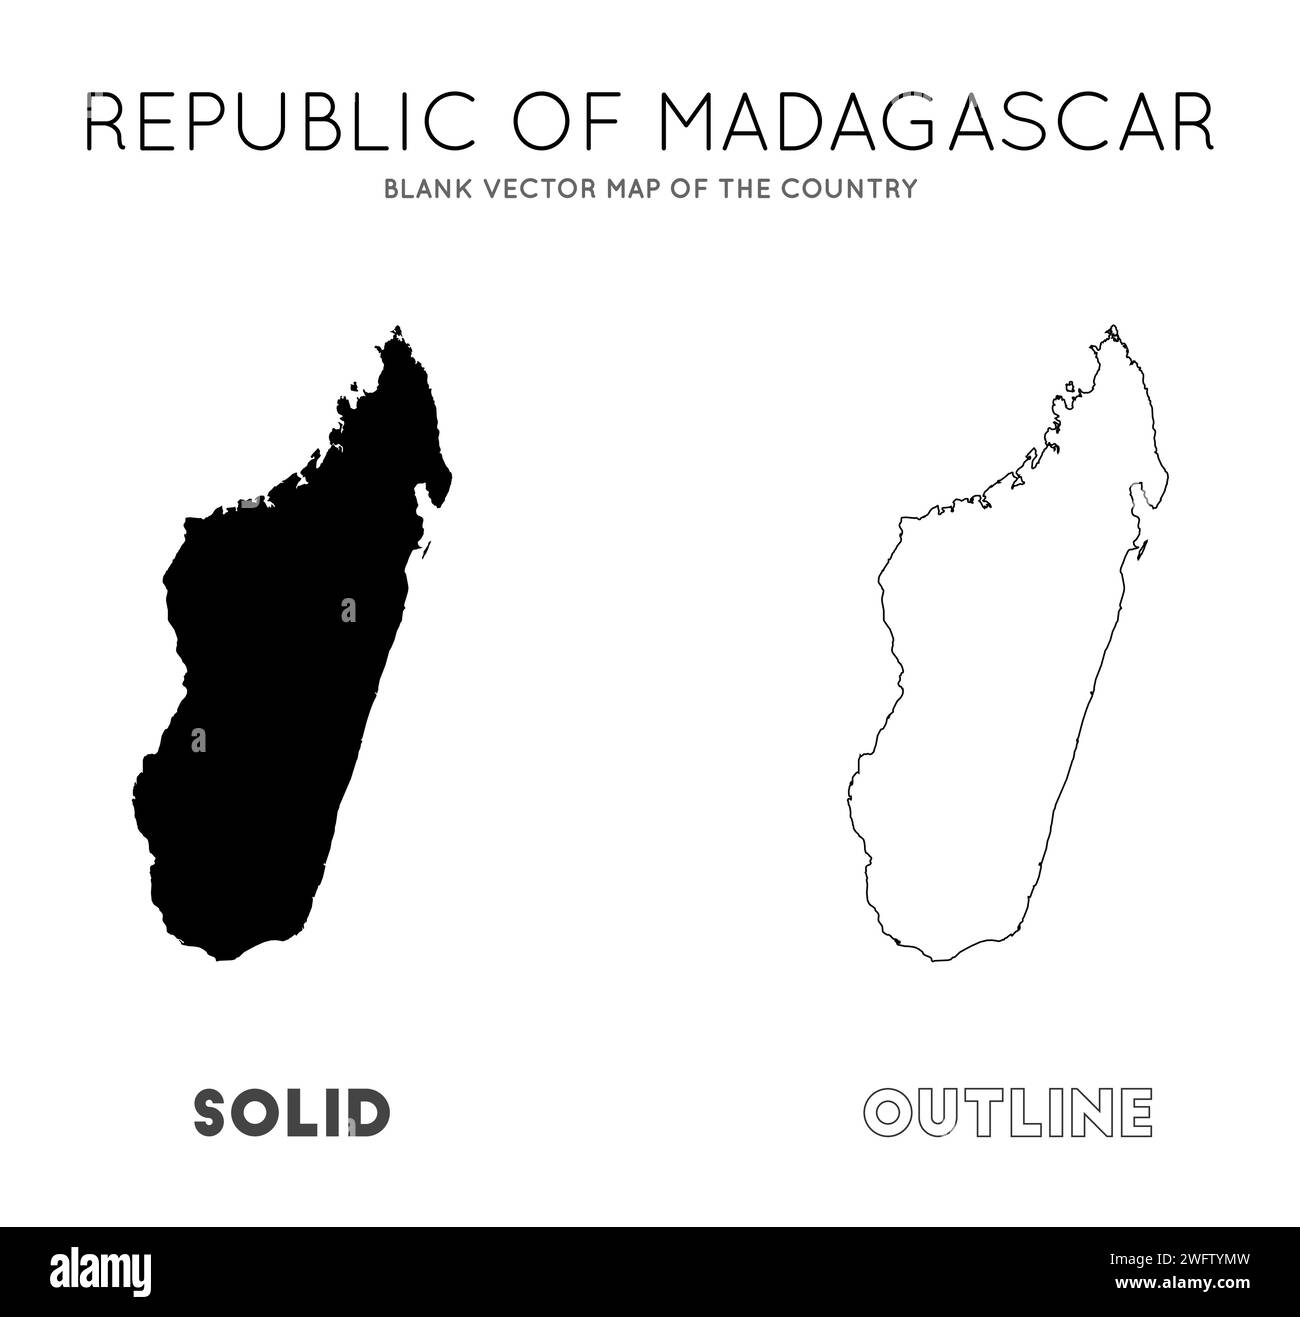 Madagascar map. Blank vector map of the Country. Borders of Madagascar for your infographic. Vector illustration. Stock Vector